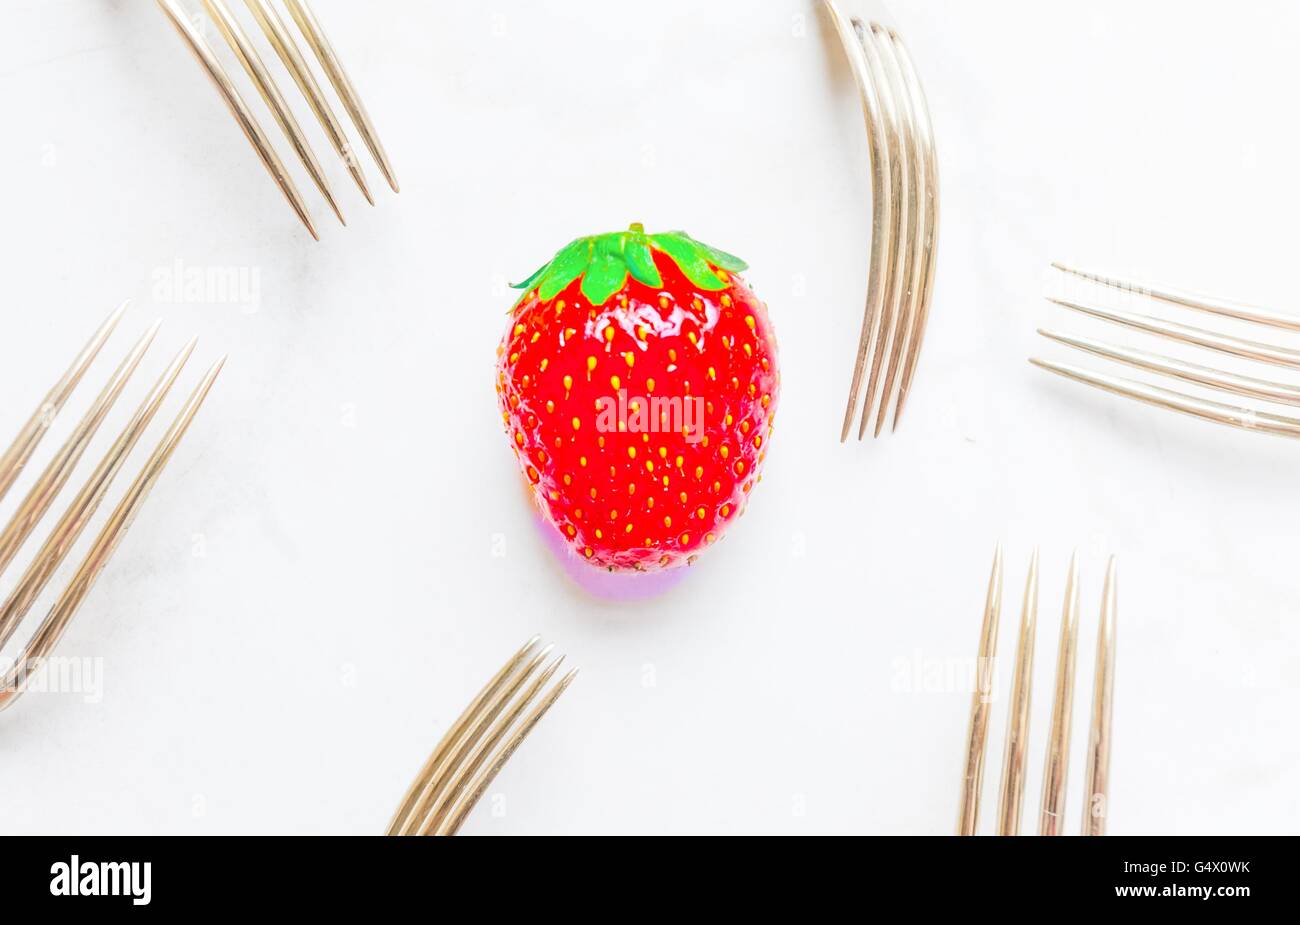 a single strawberry ,over saturated ,surrounded by silver vintage forks Stock Photo